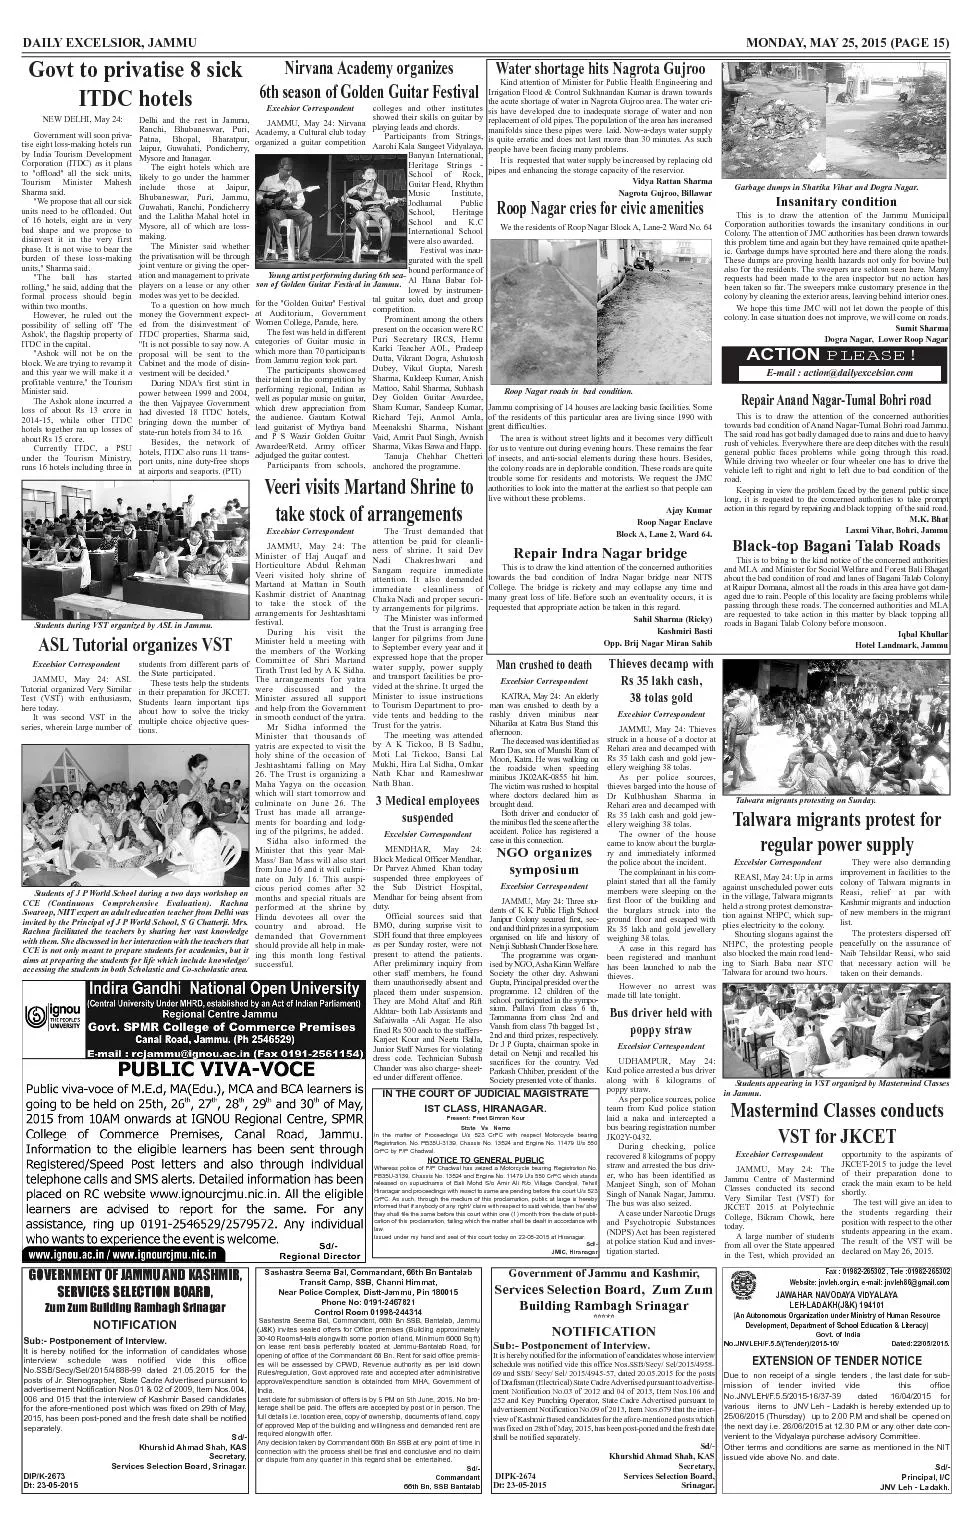 DAILYEXCELSIOR, JAMMUMONDAY, MAY25, 2015 (PAGE 15)